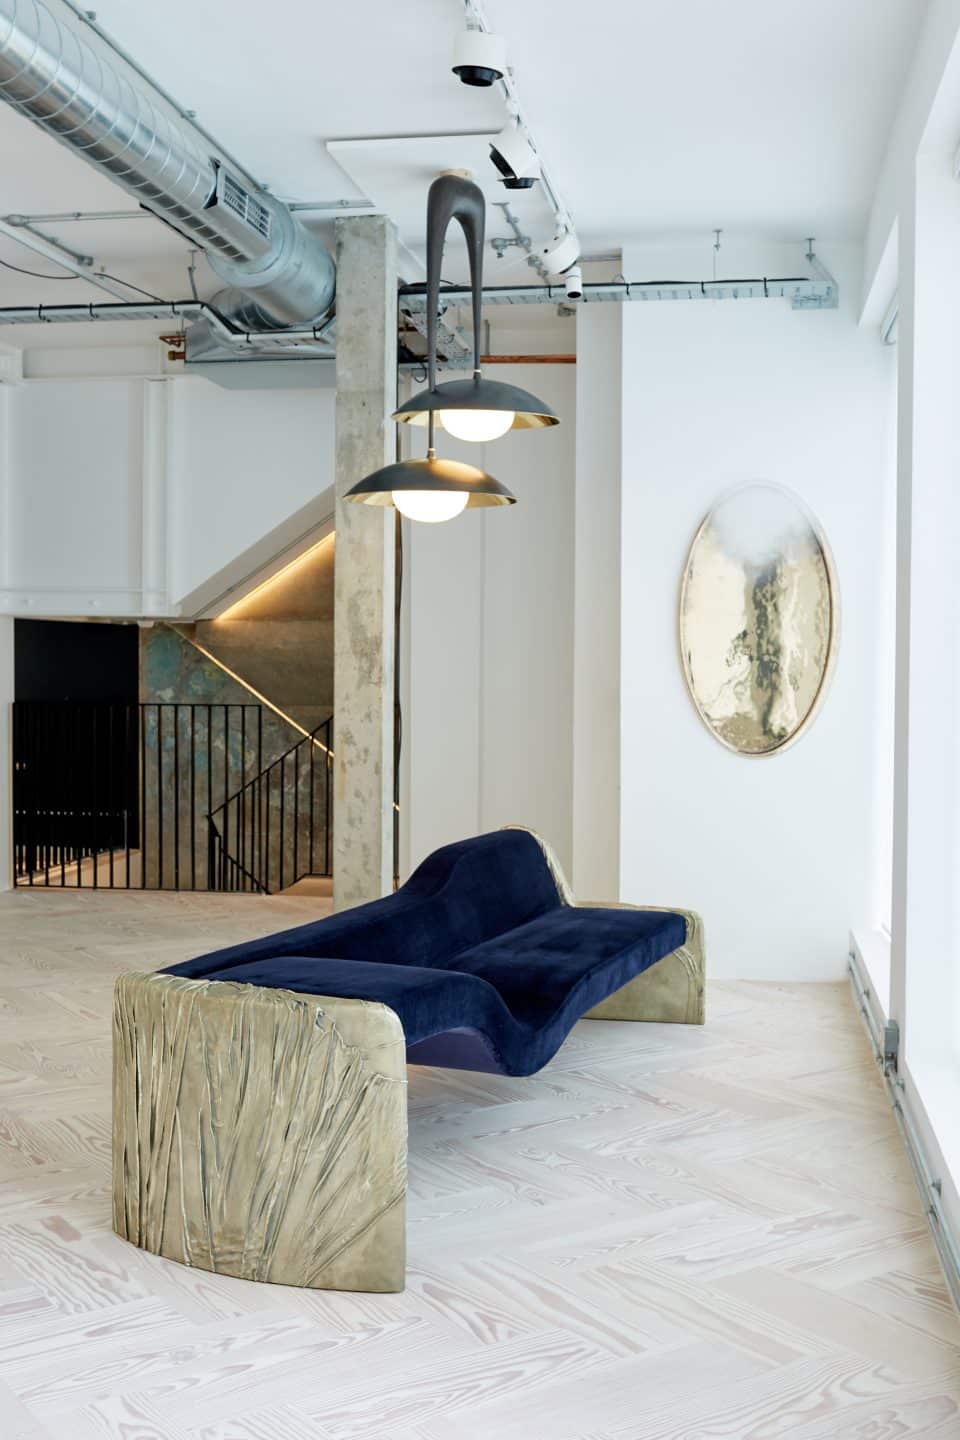 At Charles Burnand in London, Find World-Class Design or Create Your Own